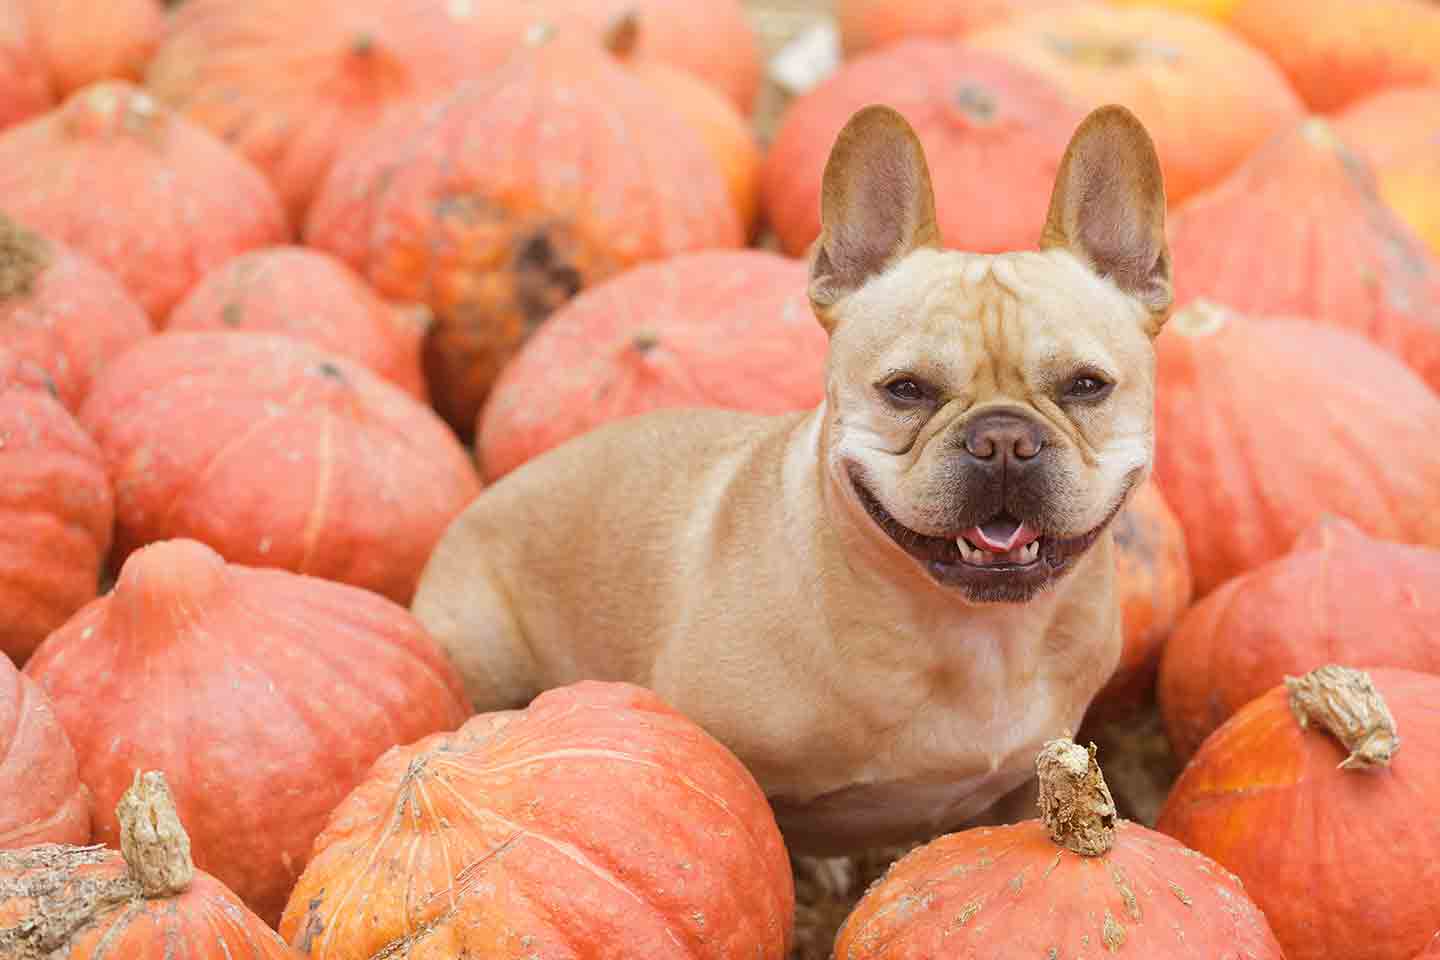 A dog sitting in a pile of pumpkins